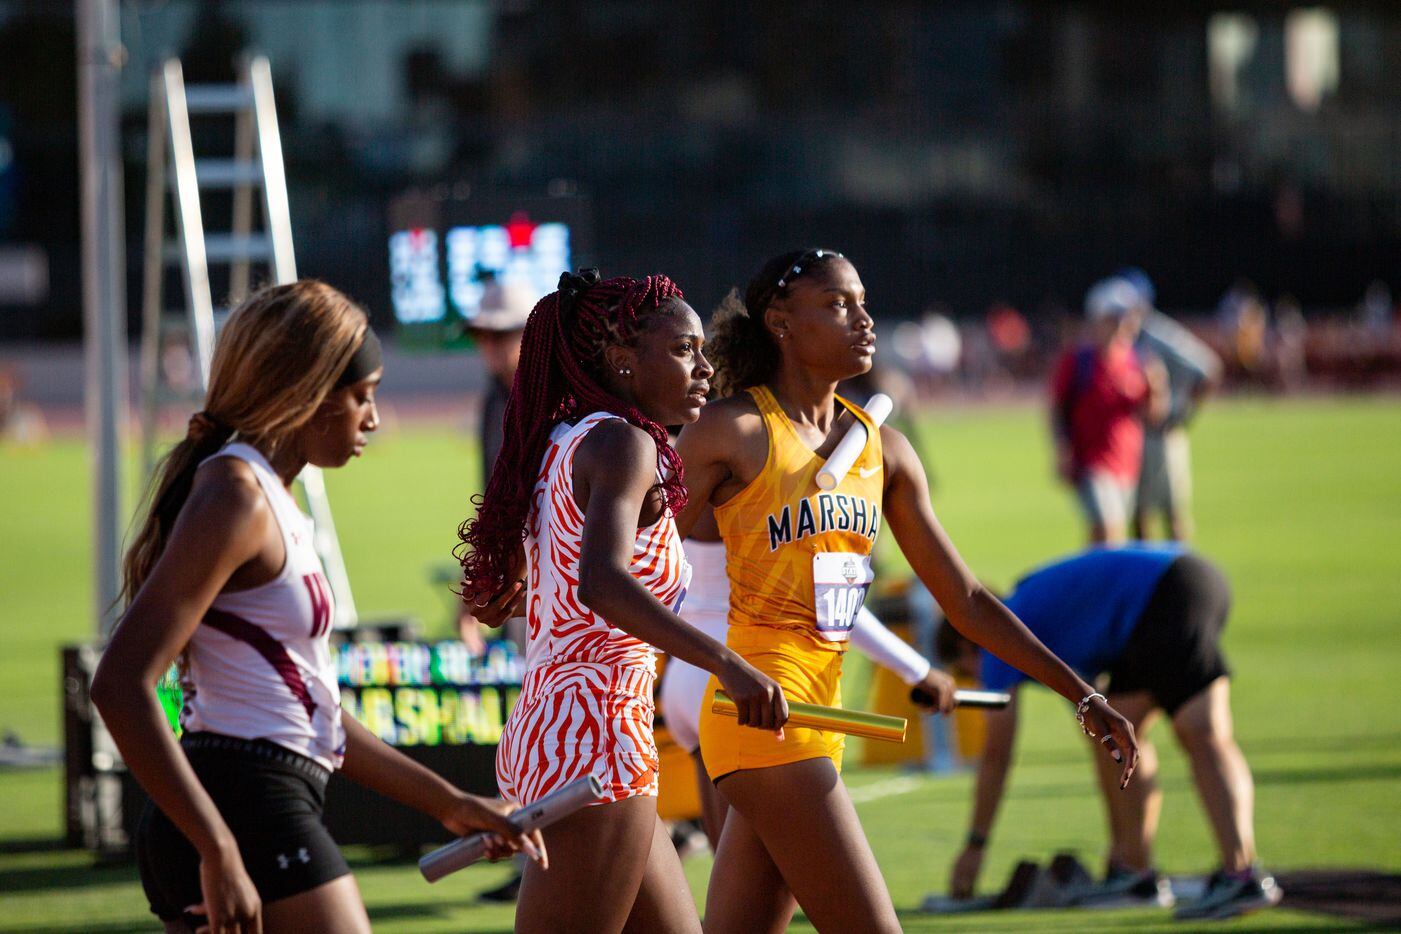 Lancaster’s Kelaiah Daniyan reacts after crossing the finish line during the girls’ 4x200...